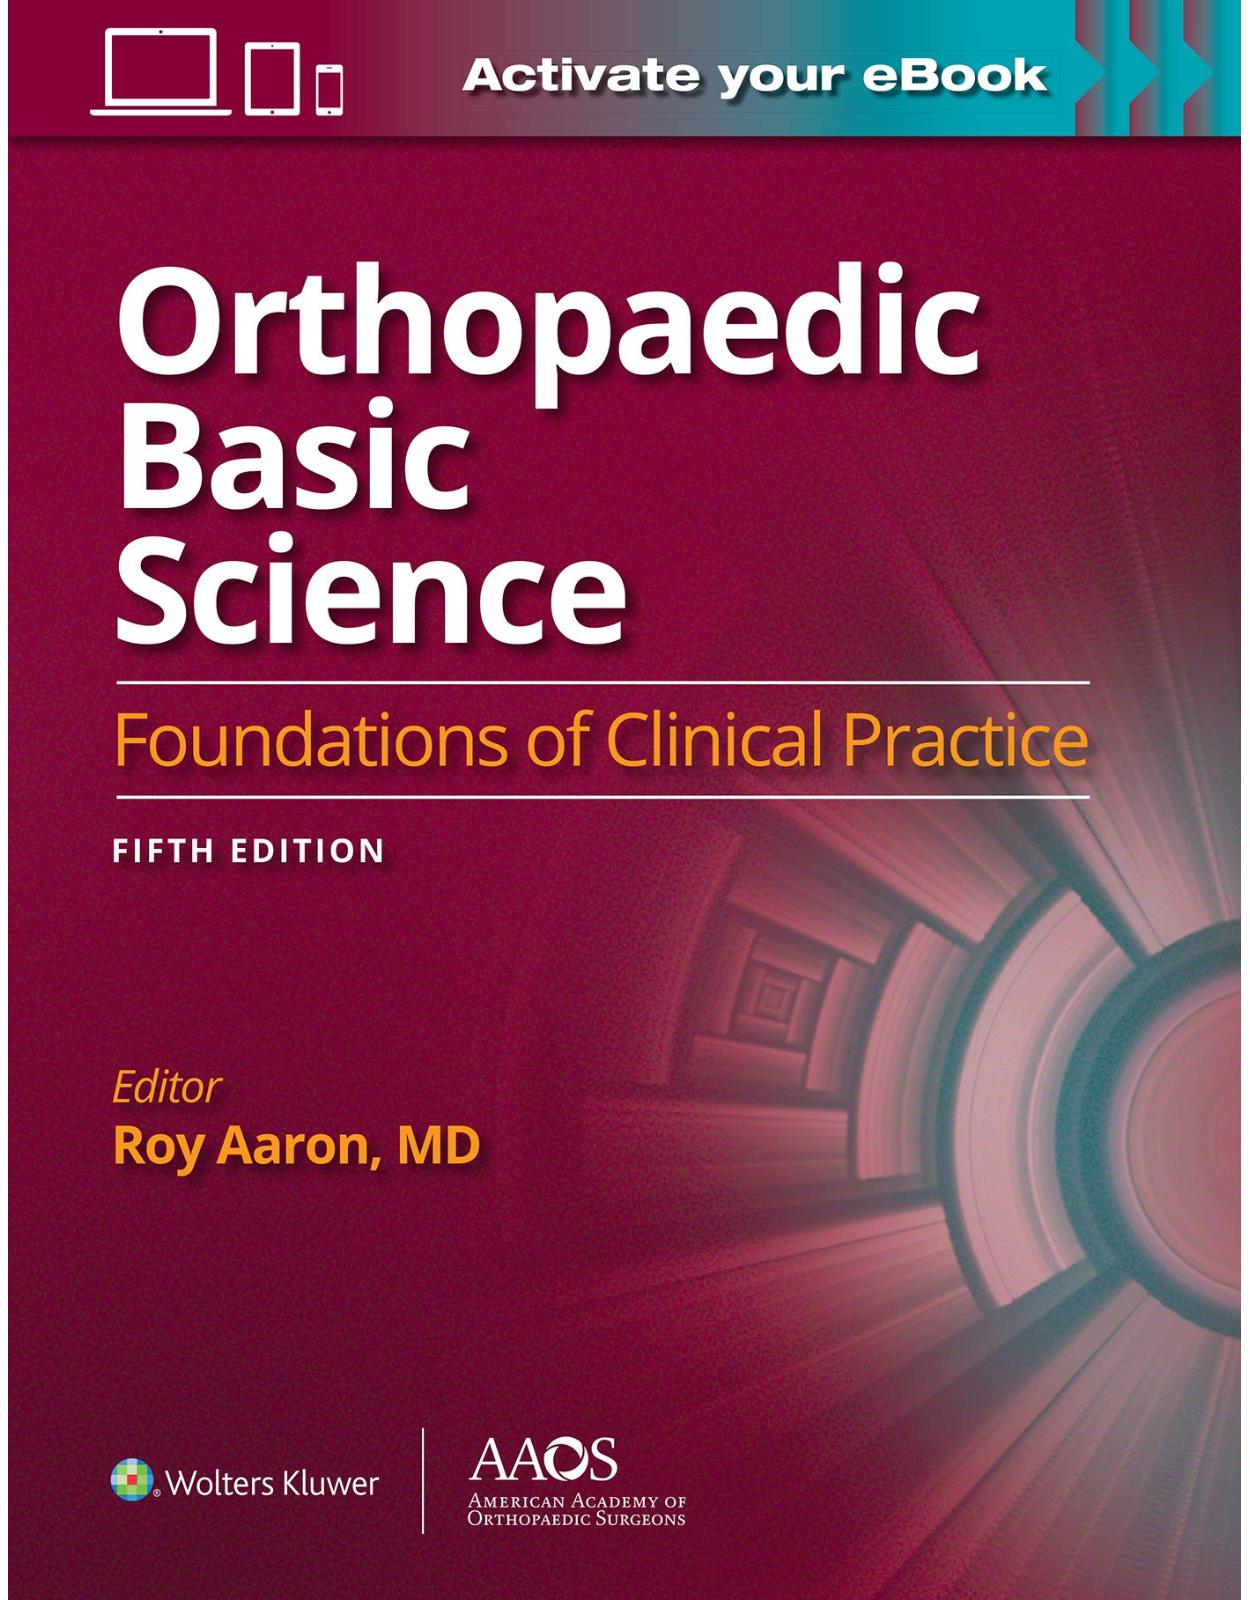 Orthopaedic Basic Science: Foundations of Clinical Practice 5